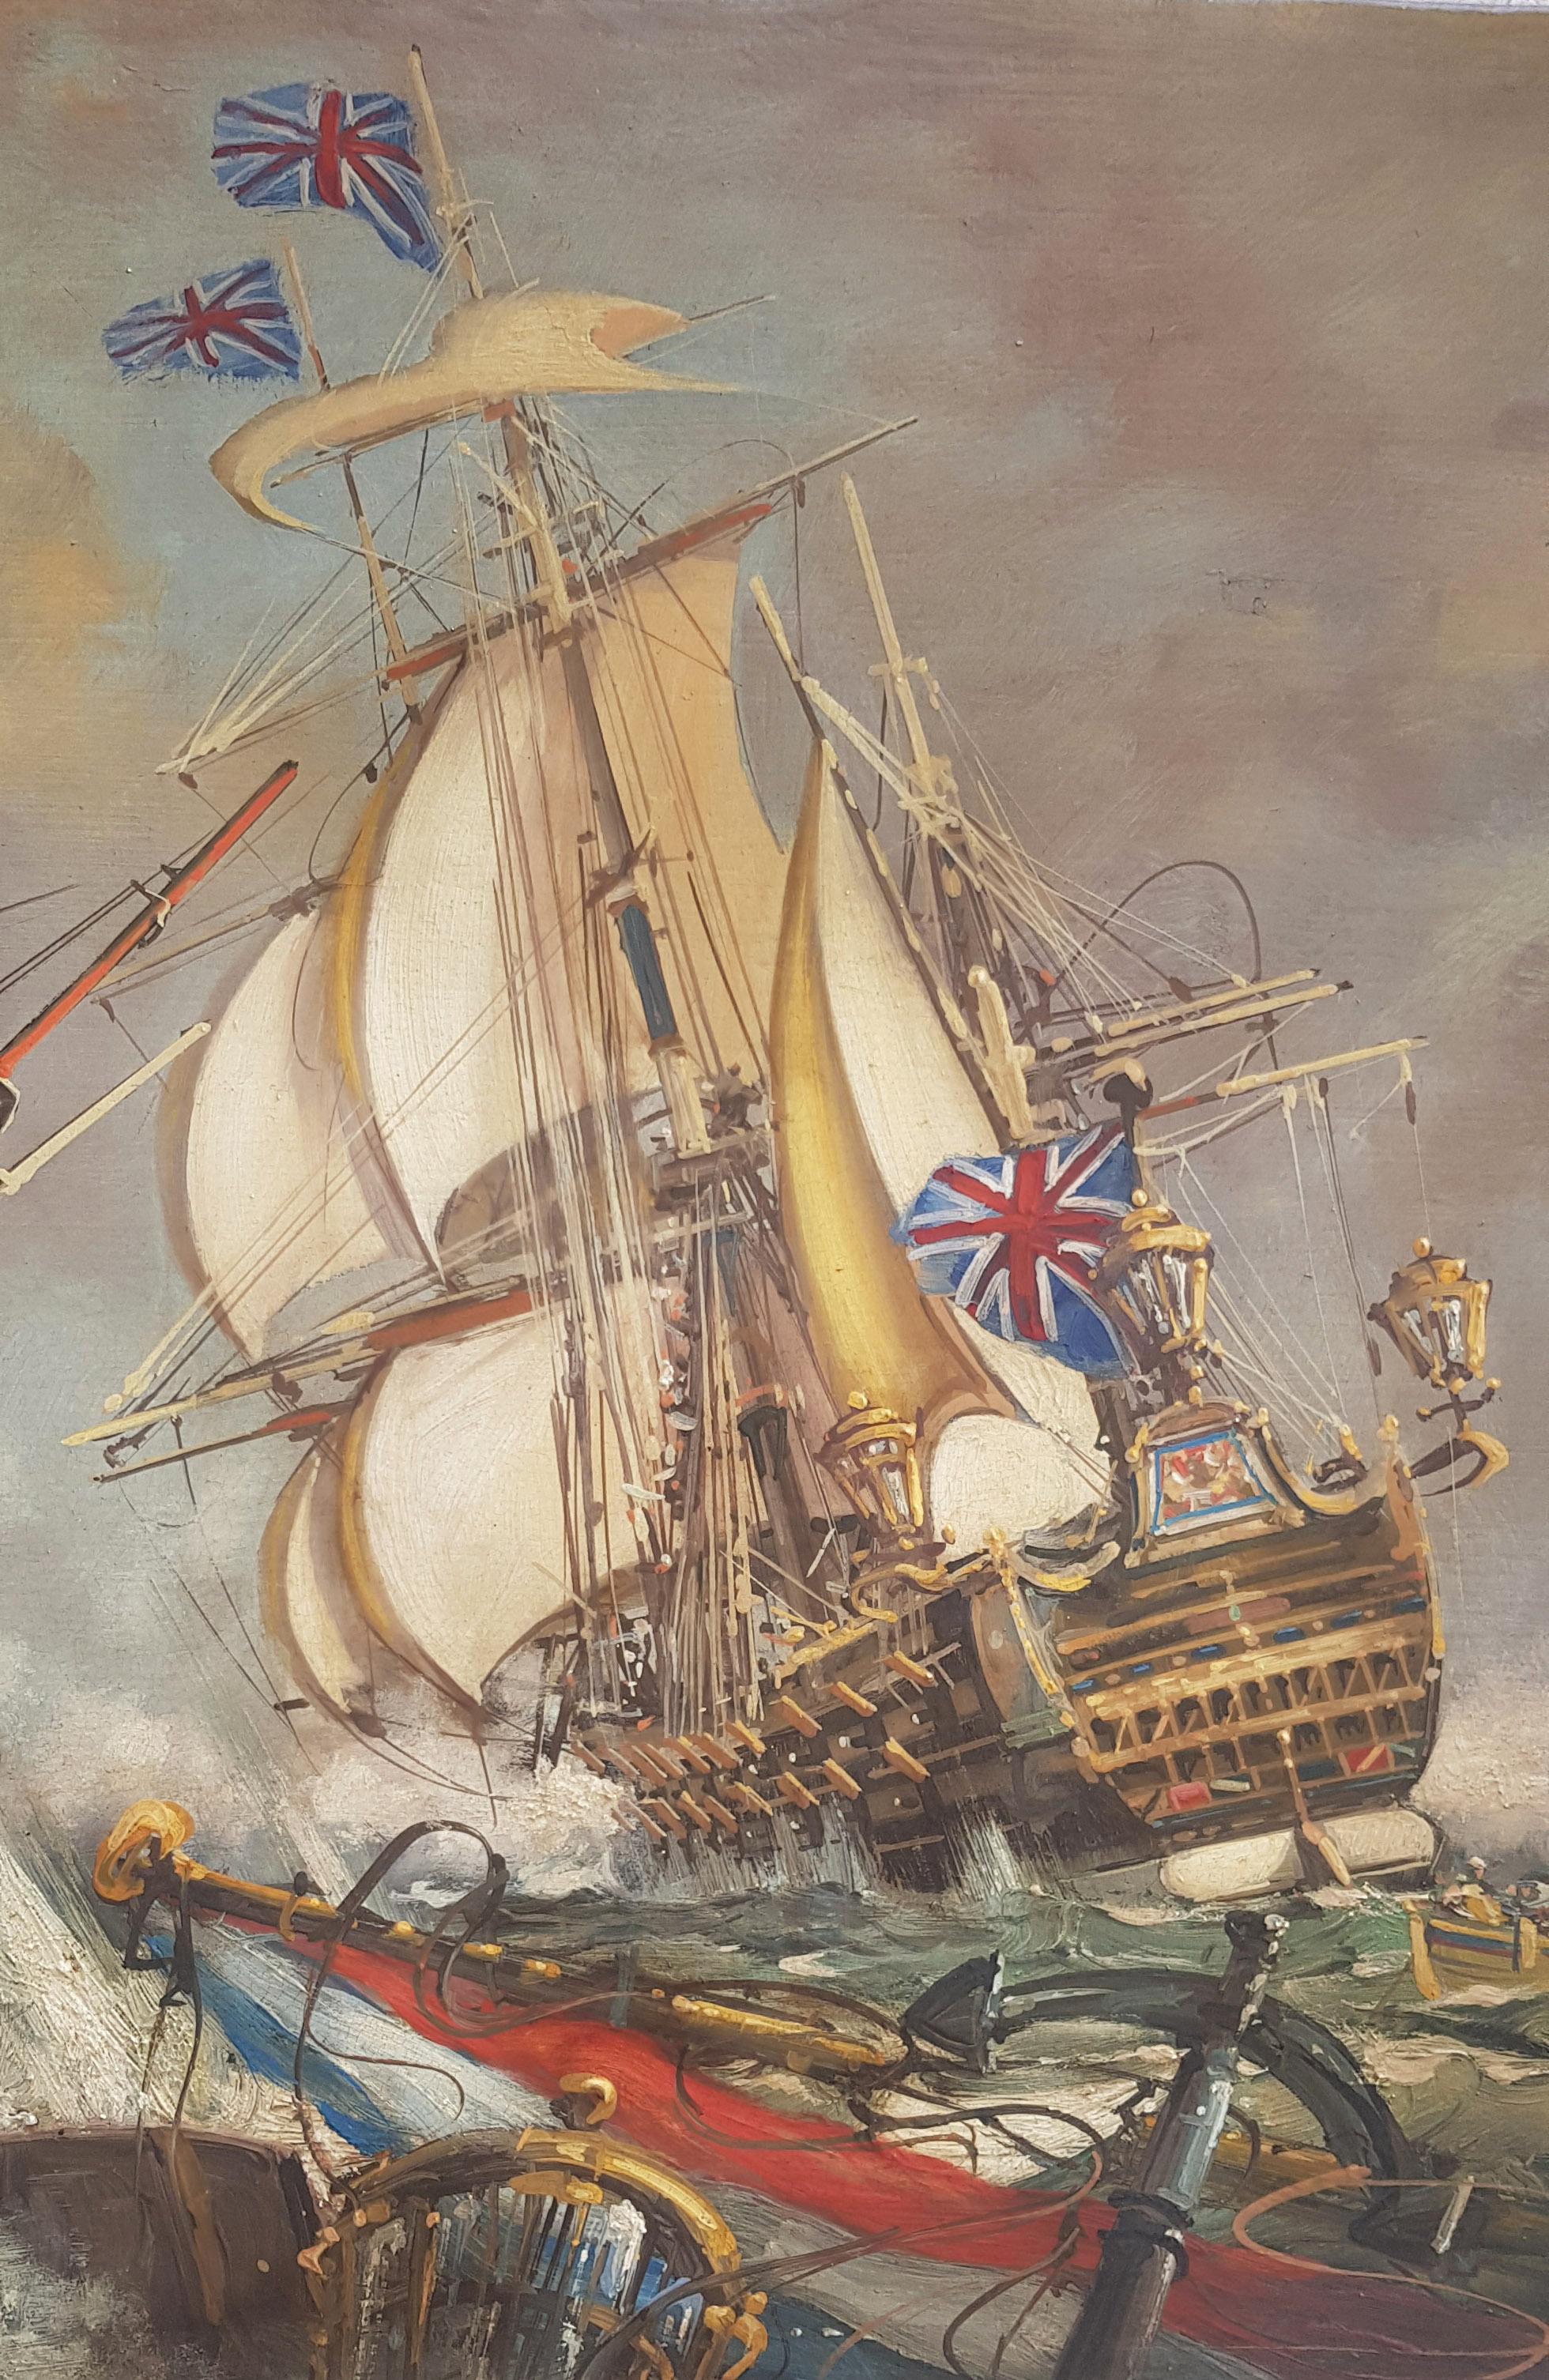 Sea Battle - John Stevens Italia 2007 - Oil on canvas cm.50x130. 

In this precious oil painting Stevens is inspired by the naval battles of the English painter Derek George Montague Gardner who, after a career as a civil engineer before and after